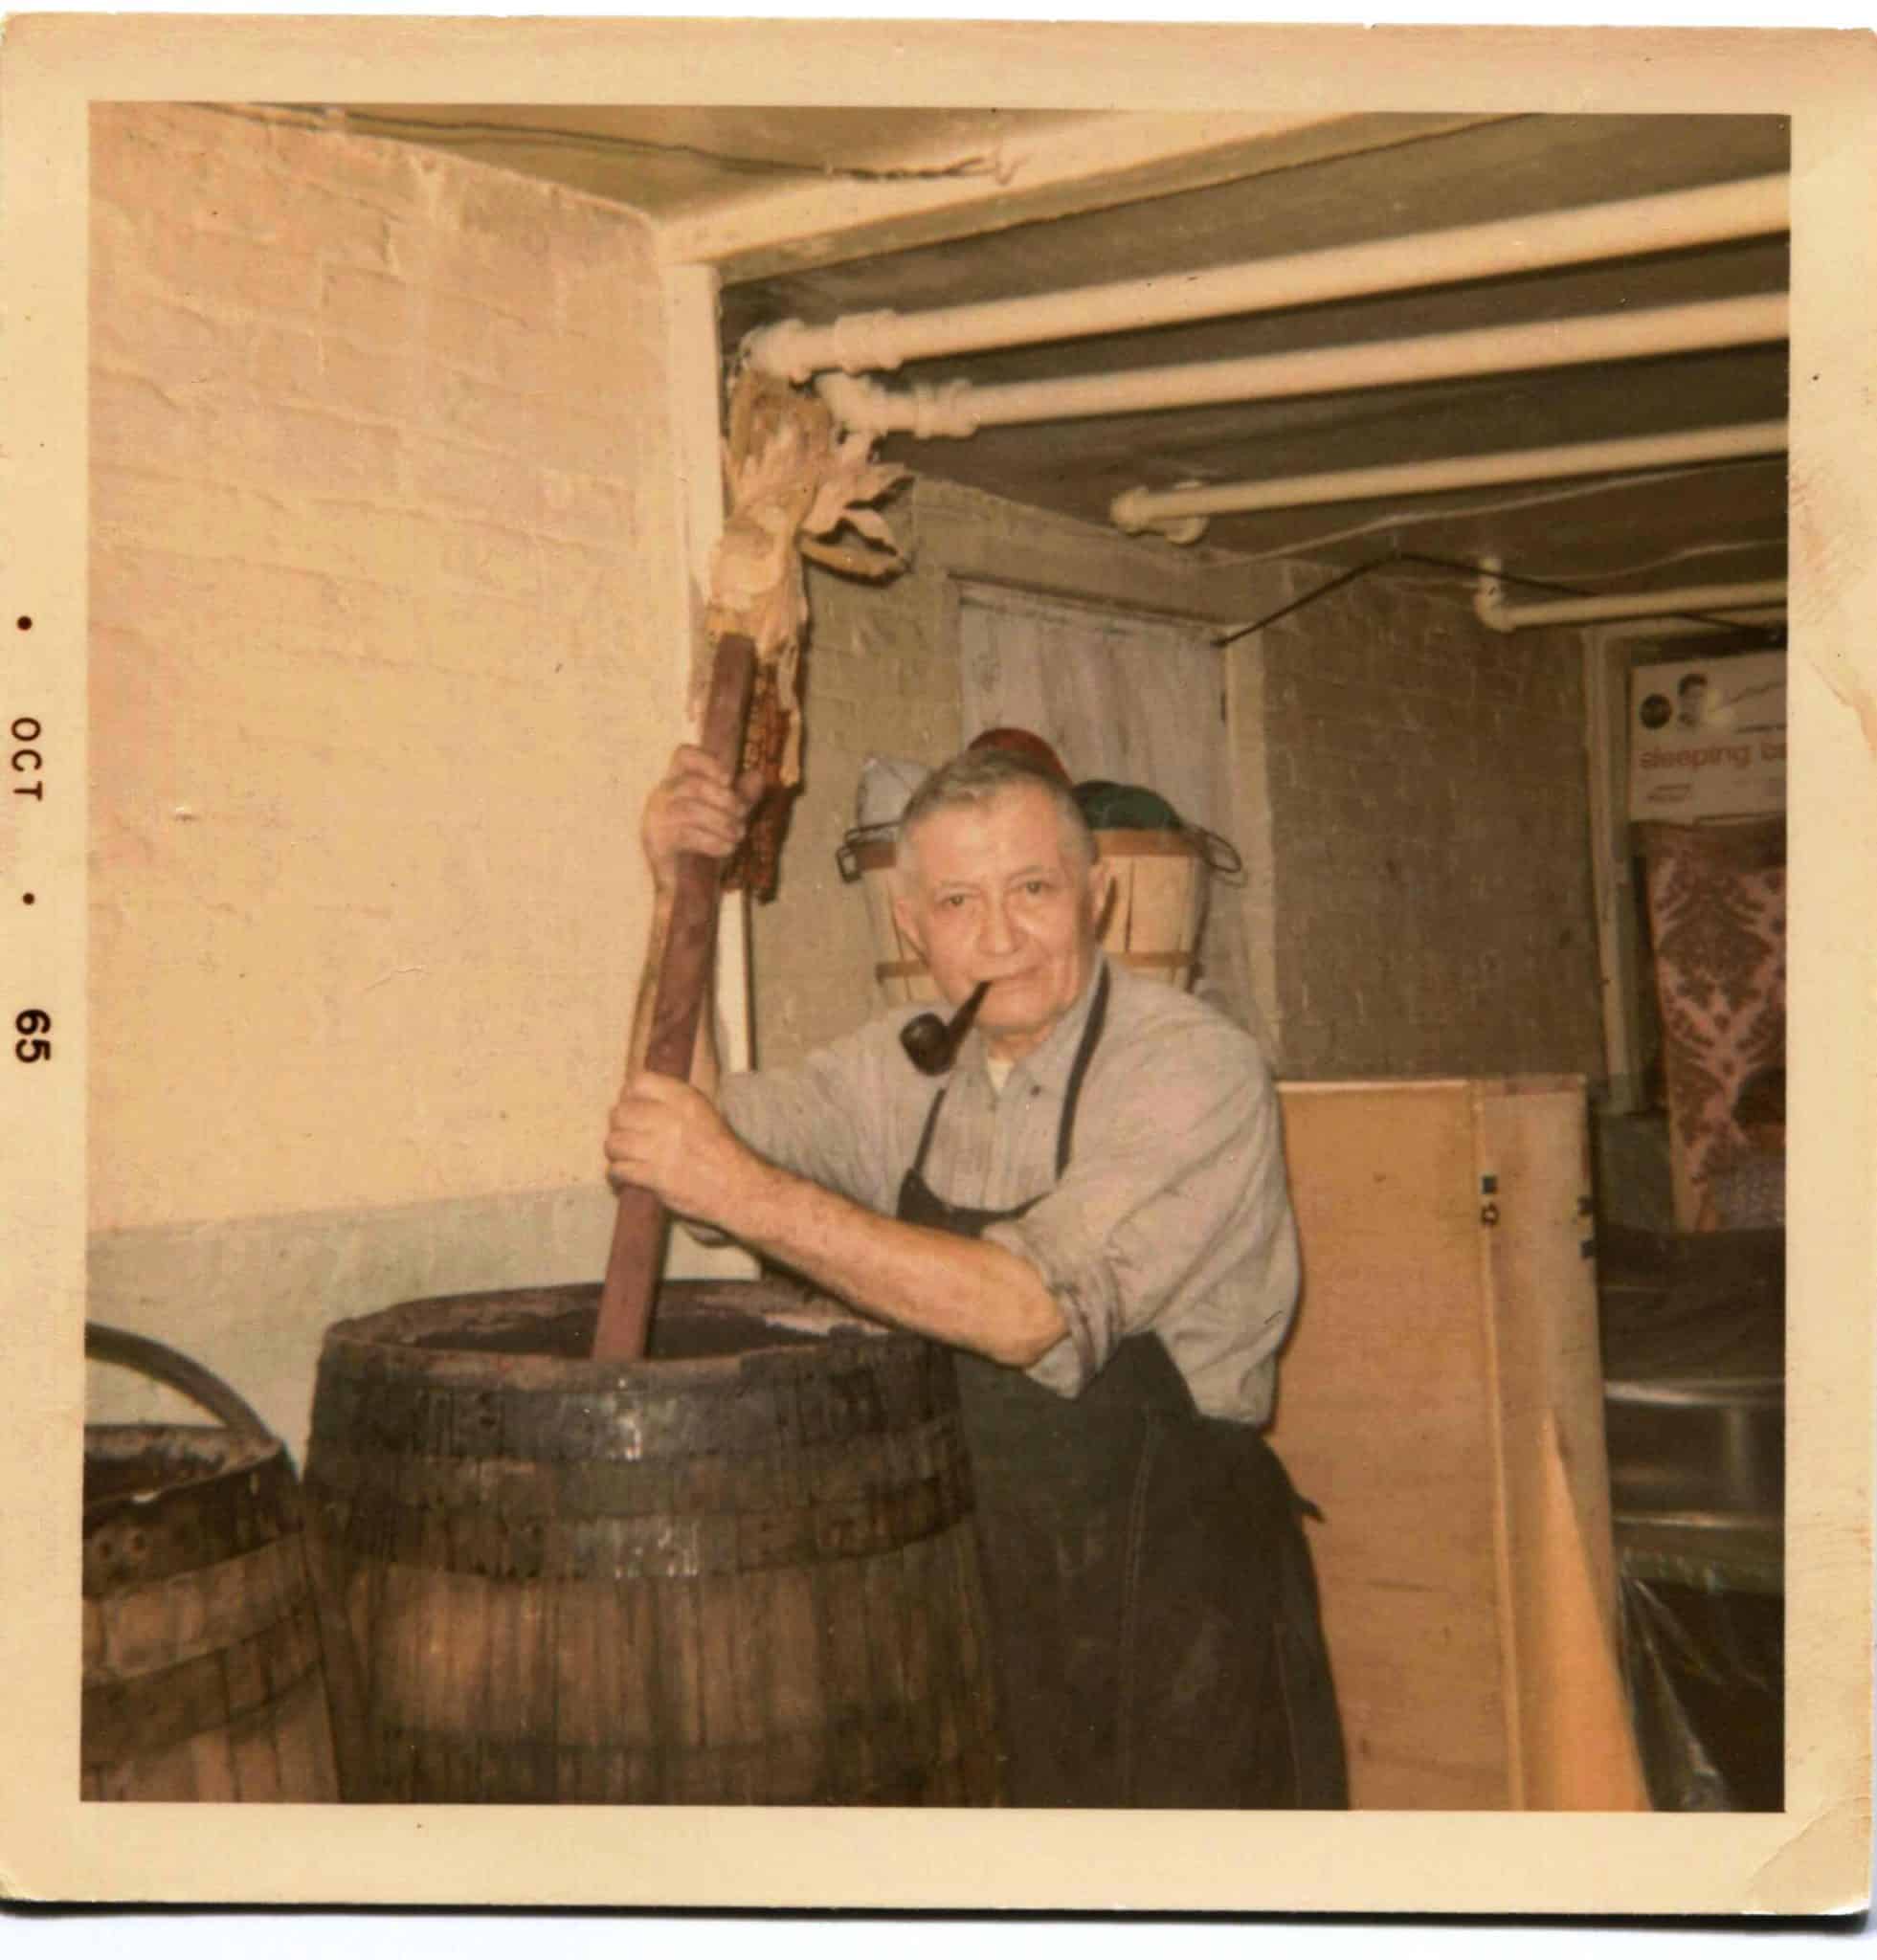 Image of Archimede Talevi, an older man with a pipe in his mouth holding a pole as he makes wine in a wooden barrel.